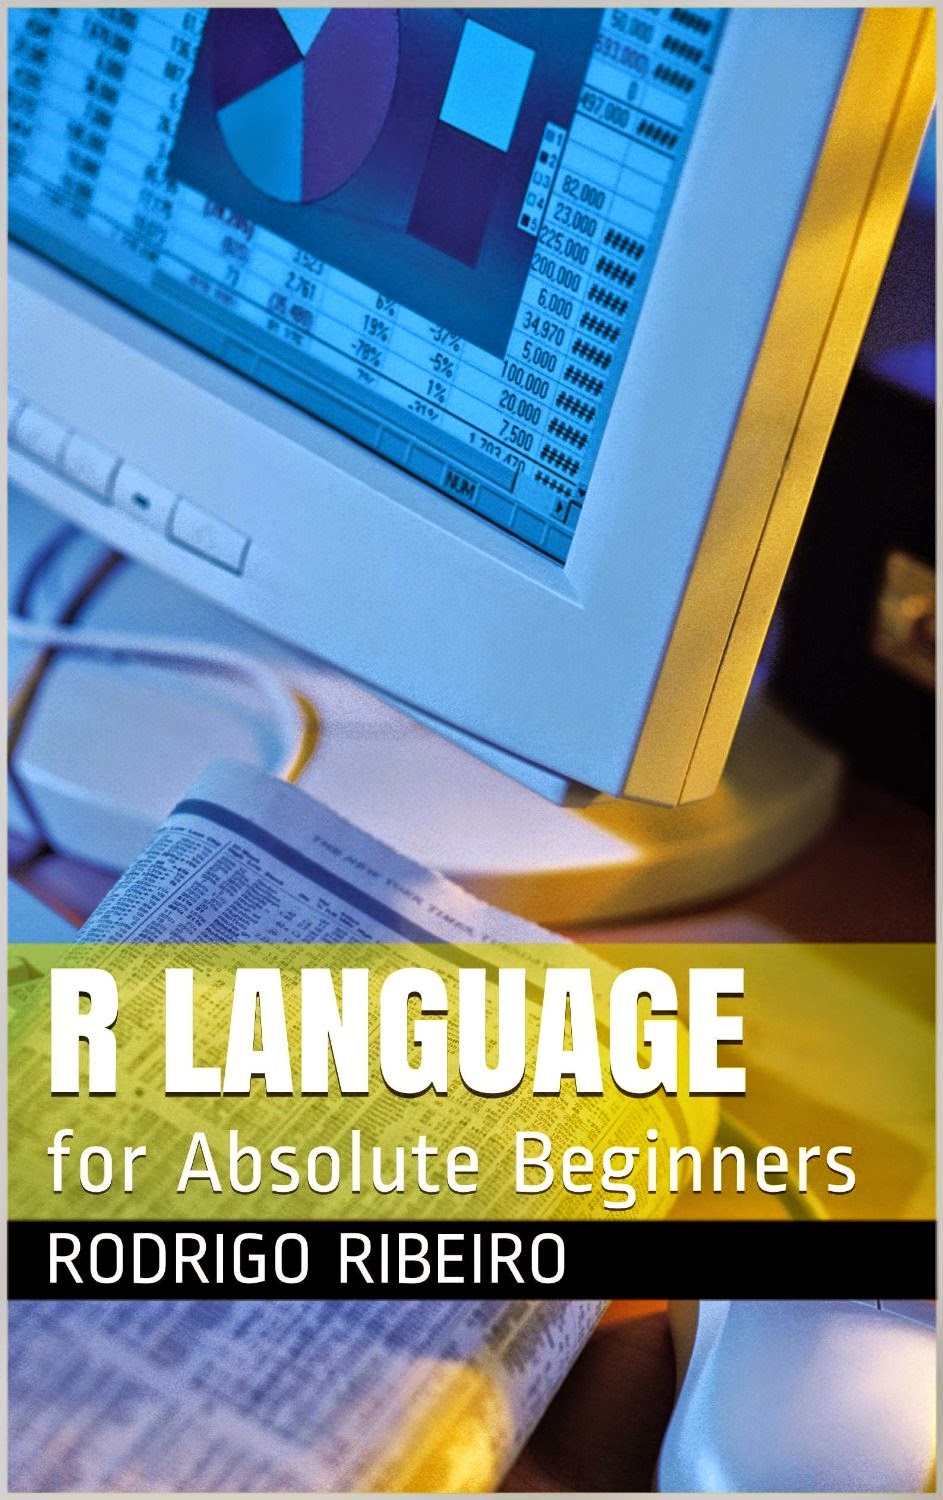 R Language: for Absolute Beginners